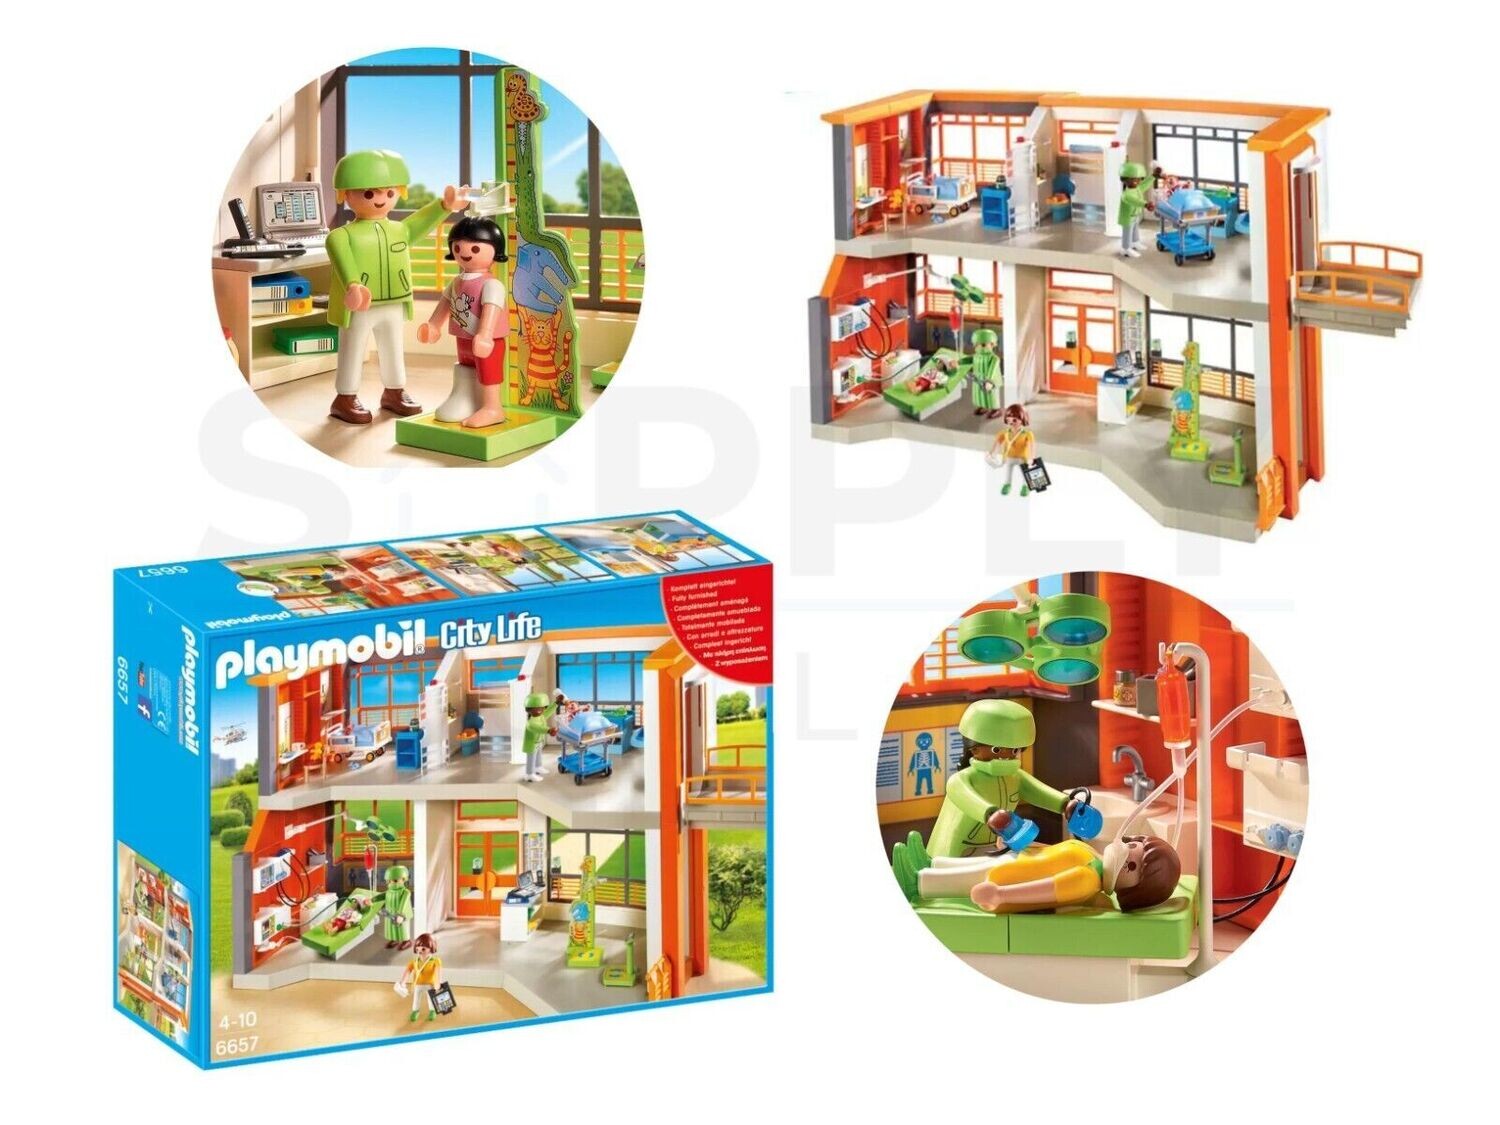 PLAYMOBIL City Life Furnished Children's Hospital - Supply Outlet